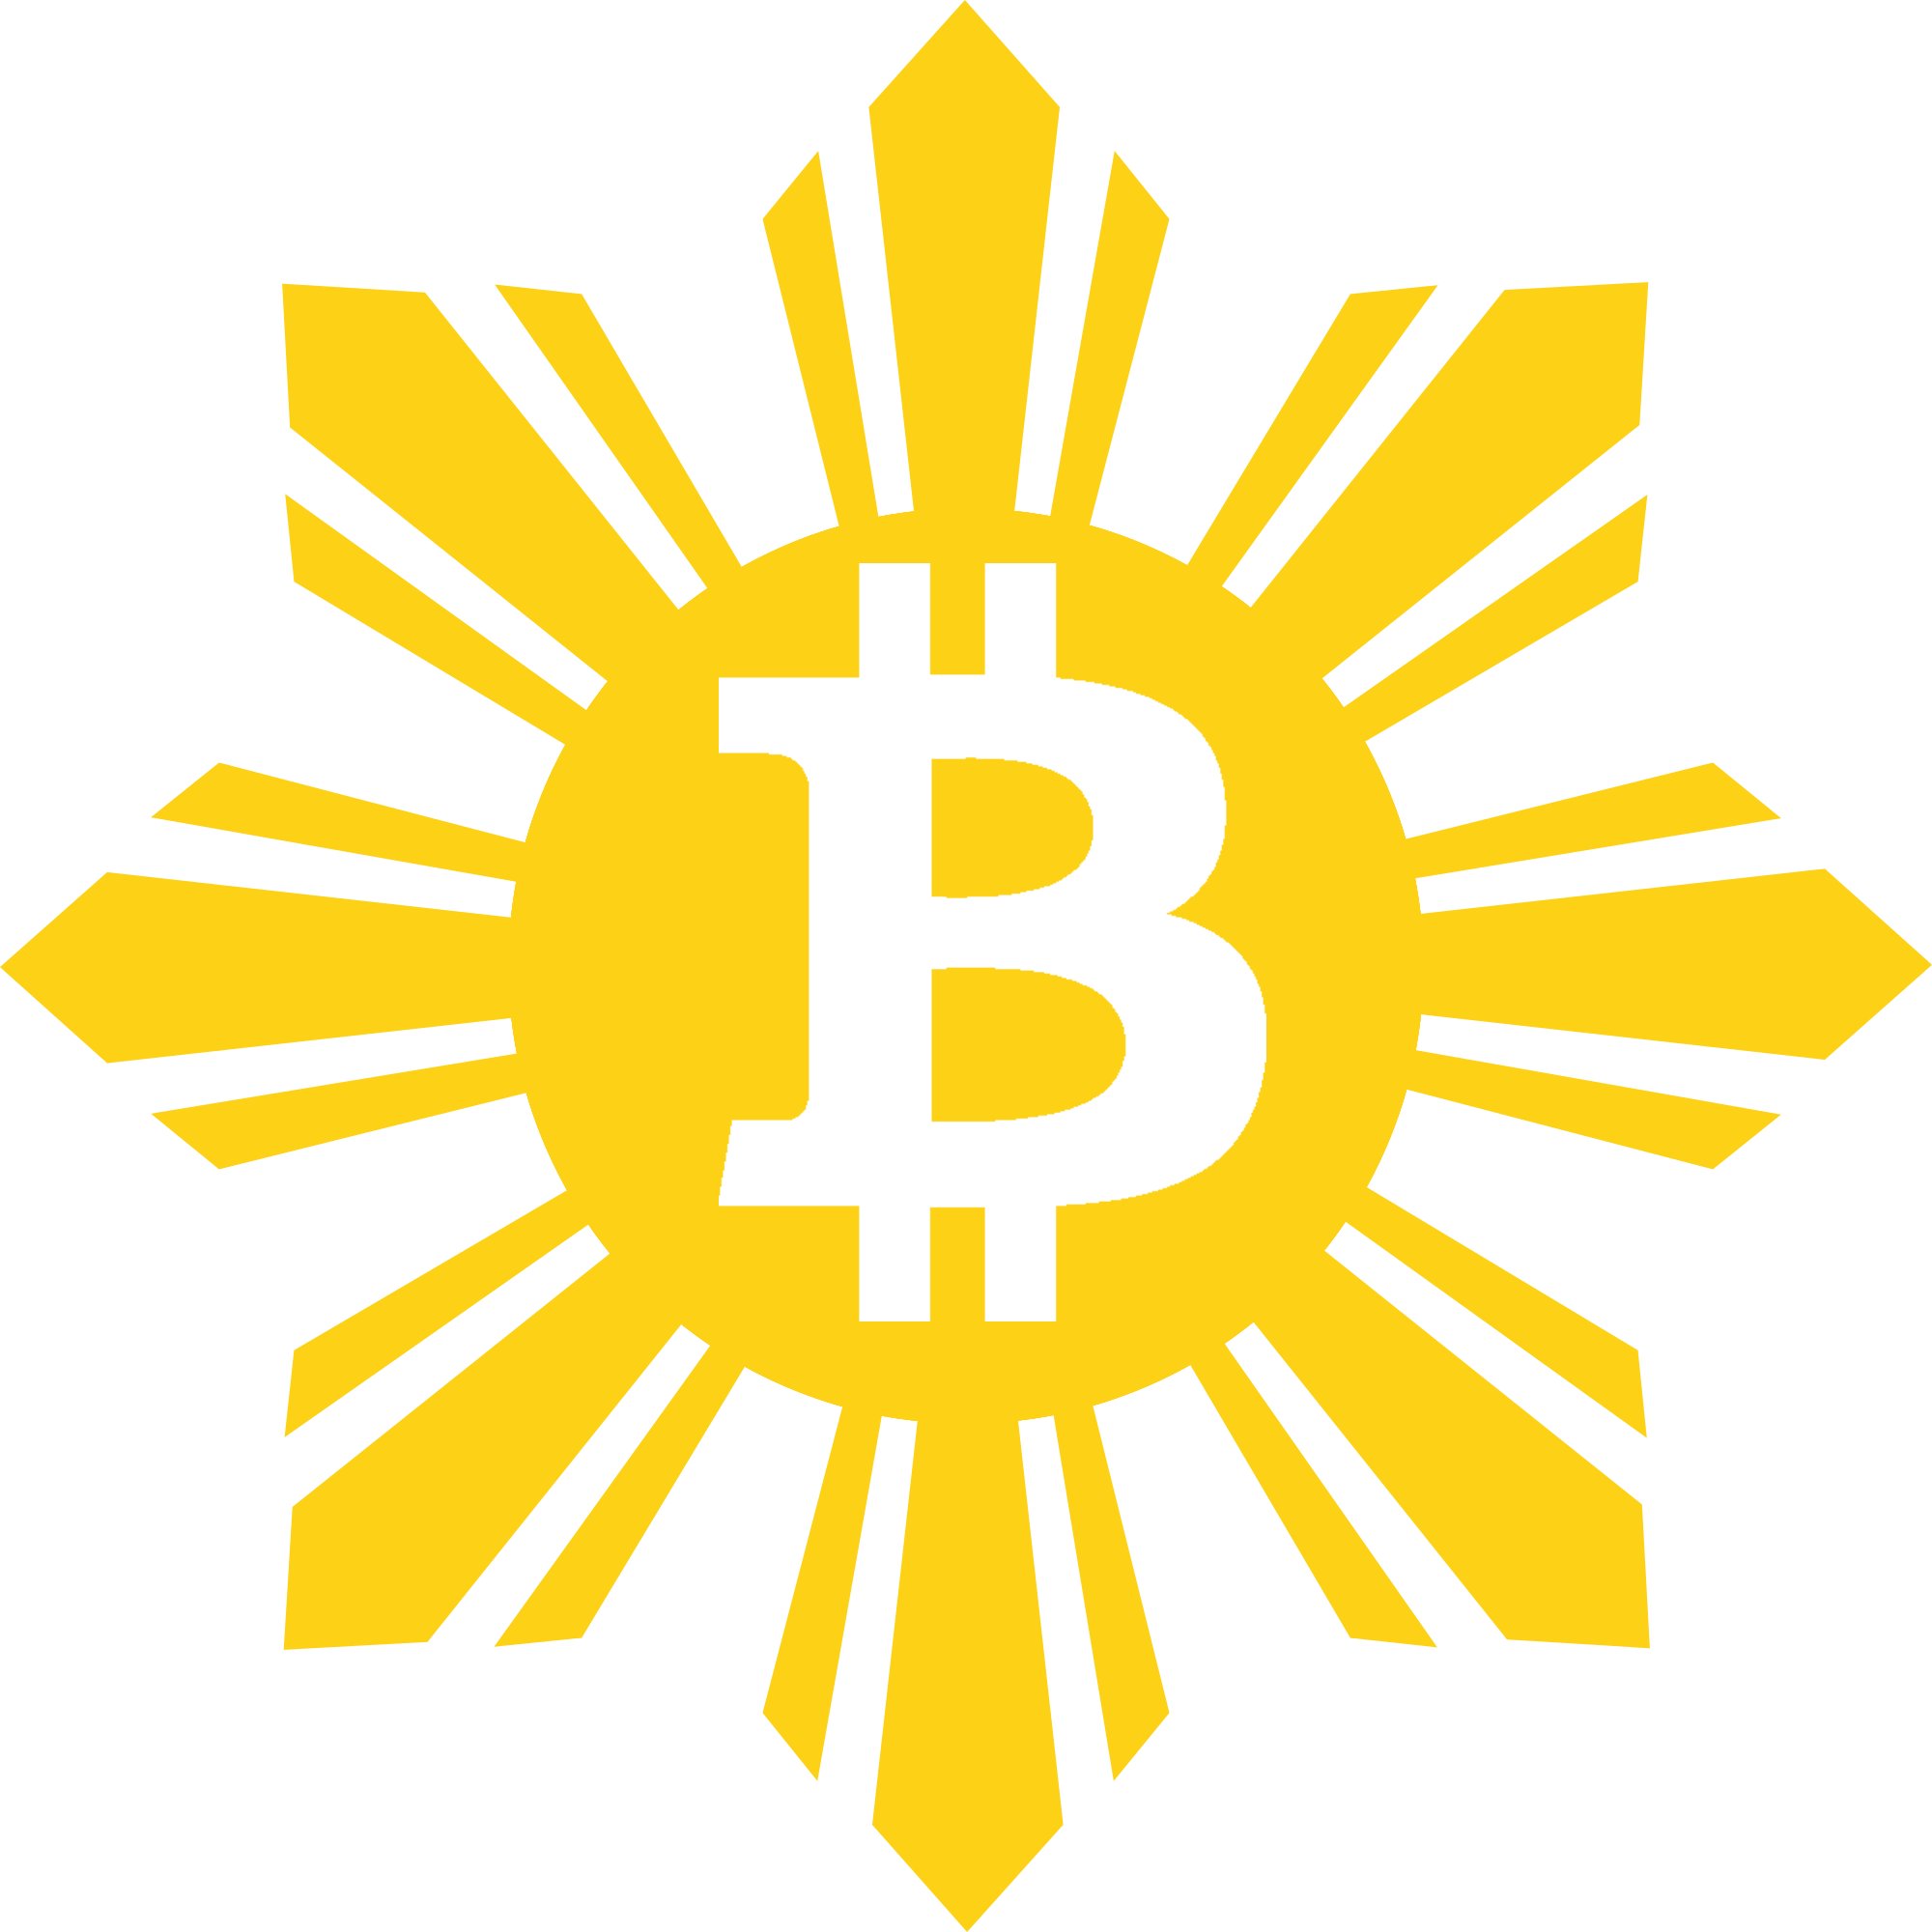 Just Follow and Will Follow Back 
FILIPINO WEBSITE AND WHITEPAPER TRANSLATOR
#Bitcoin #Ethereum #Blockchain #DigitalCurrency #Decentralized #News  #AltcoinsPH